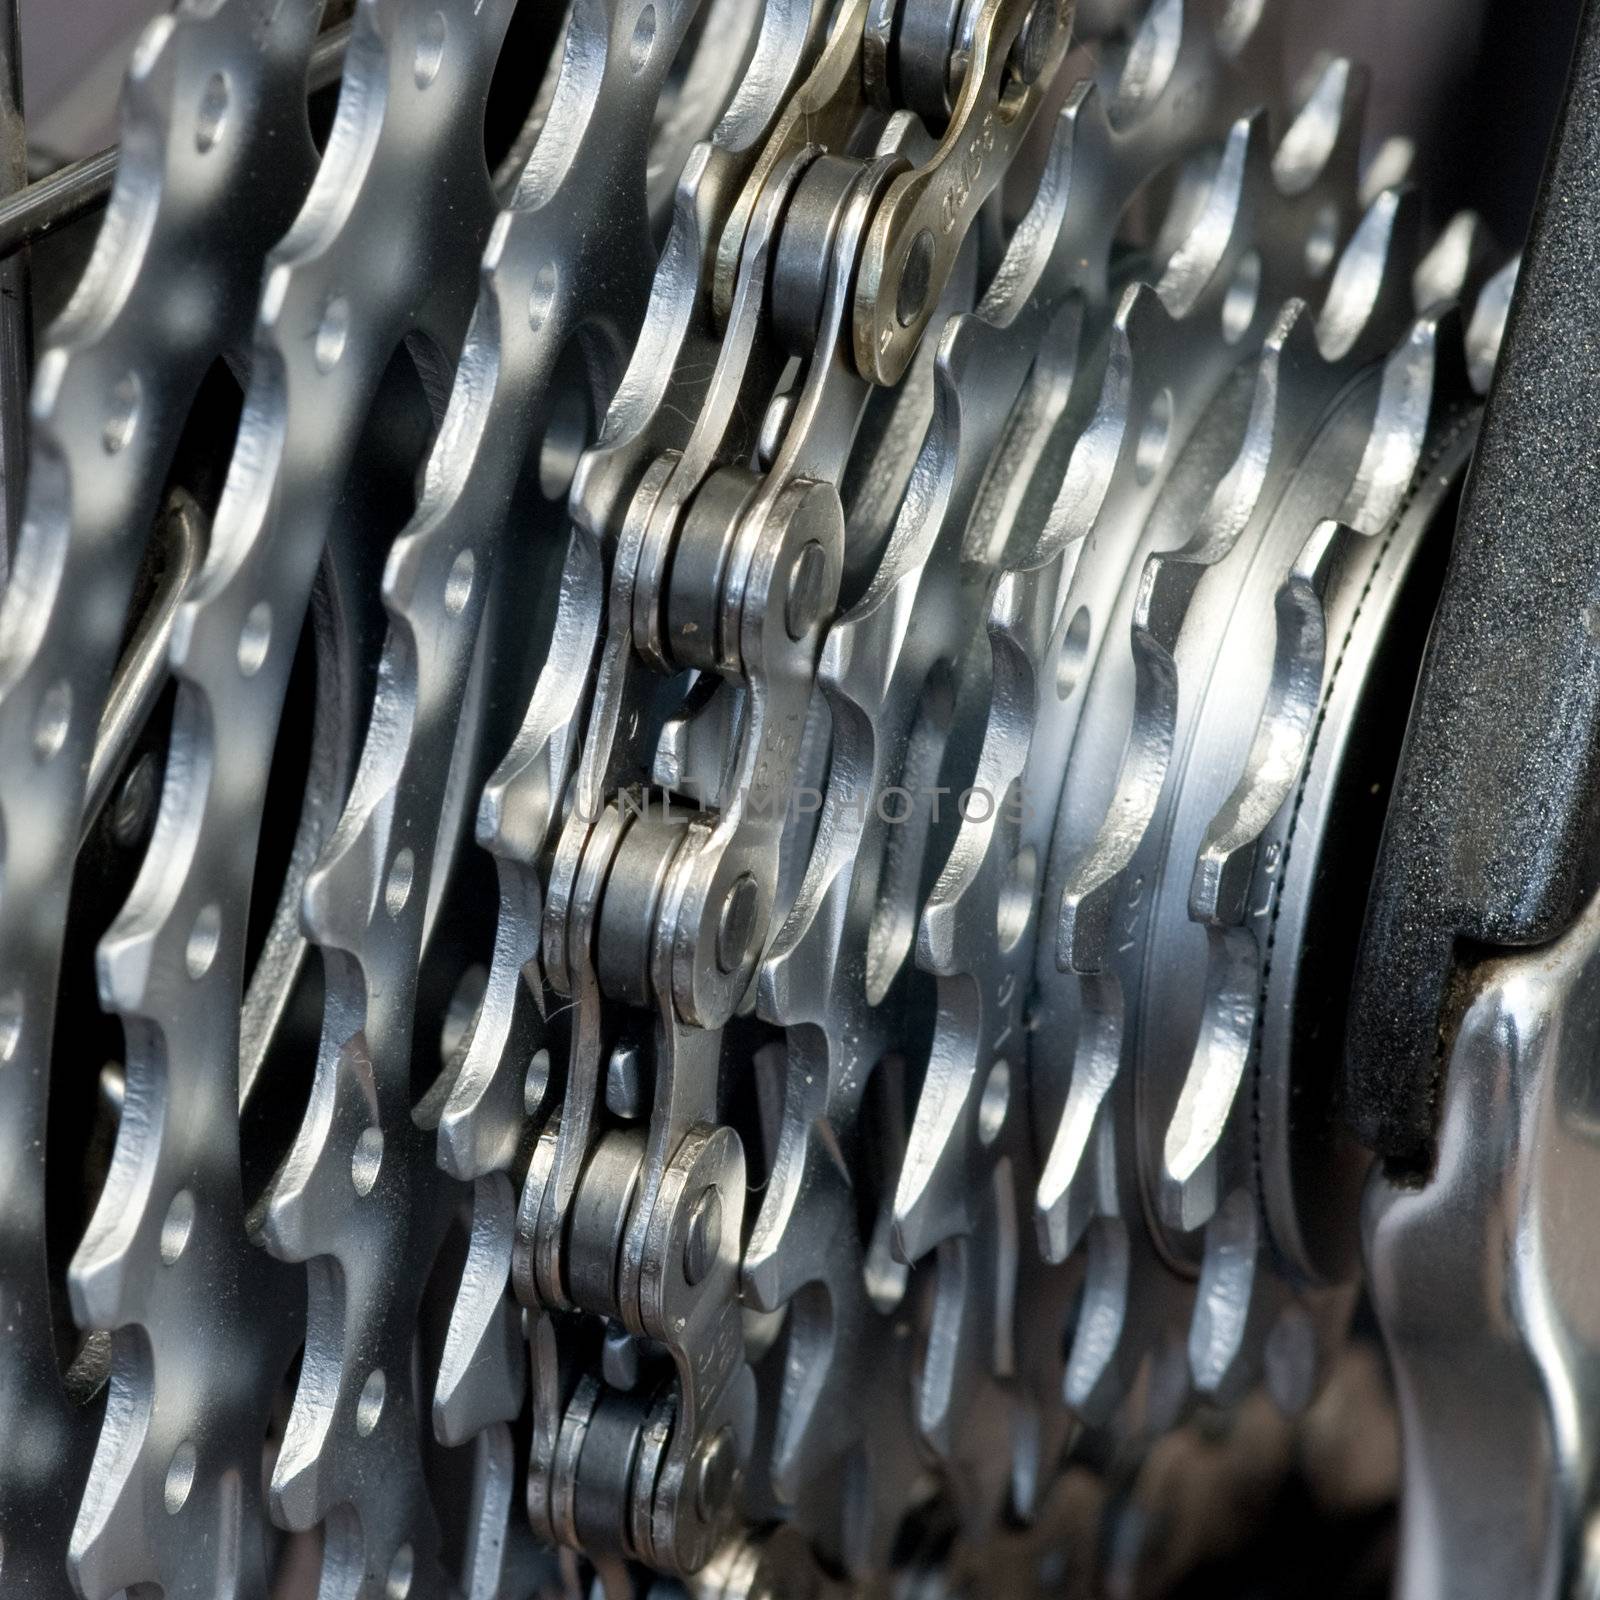 Rear mountain bike cassette with chain close-up